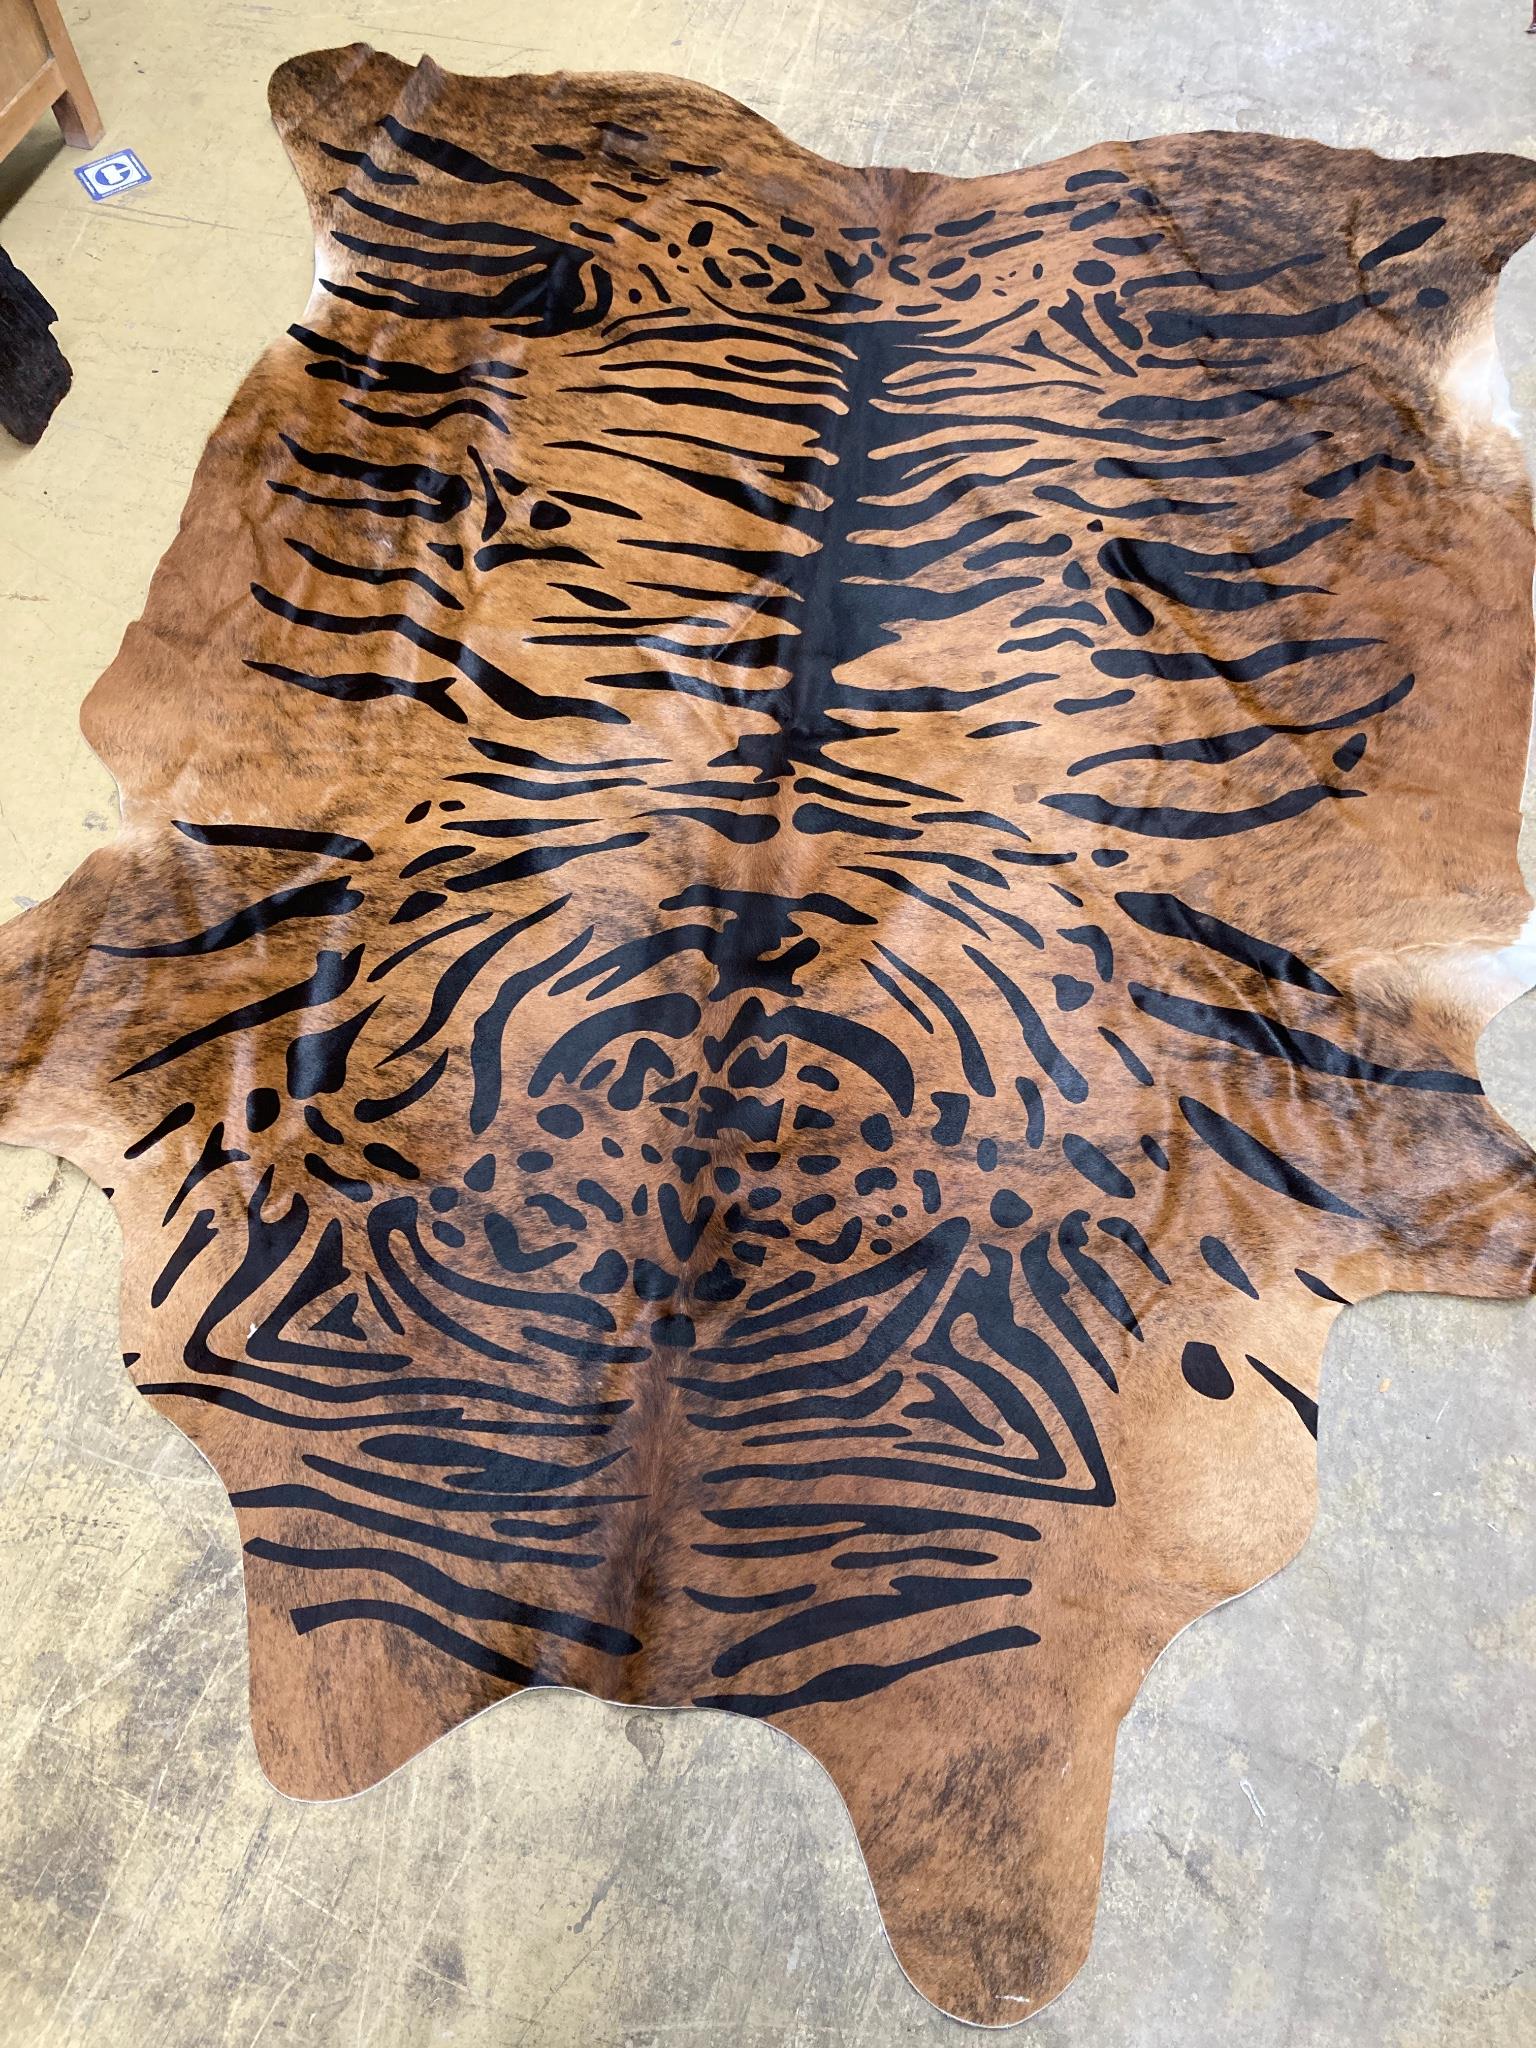 A tiger print South American cowhide rug, approx. 240 x 90cm